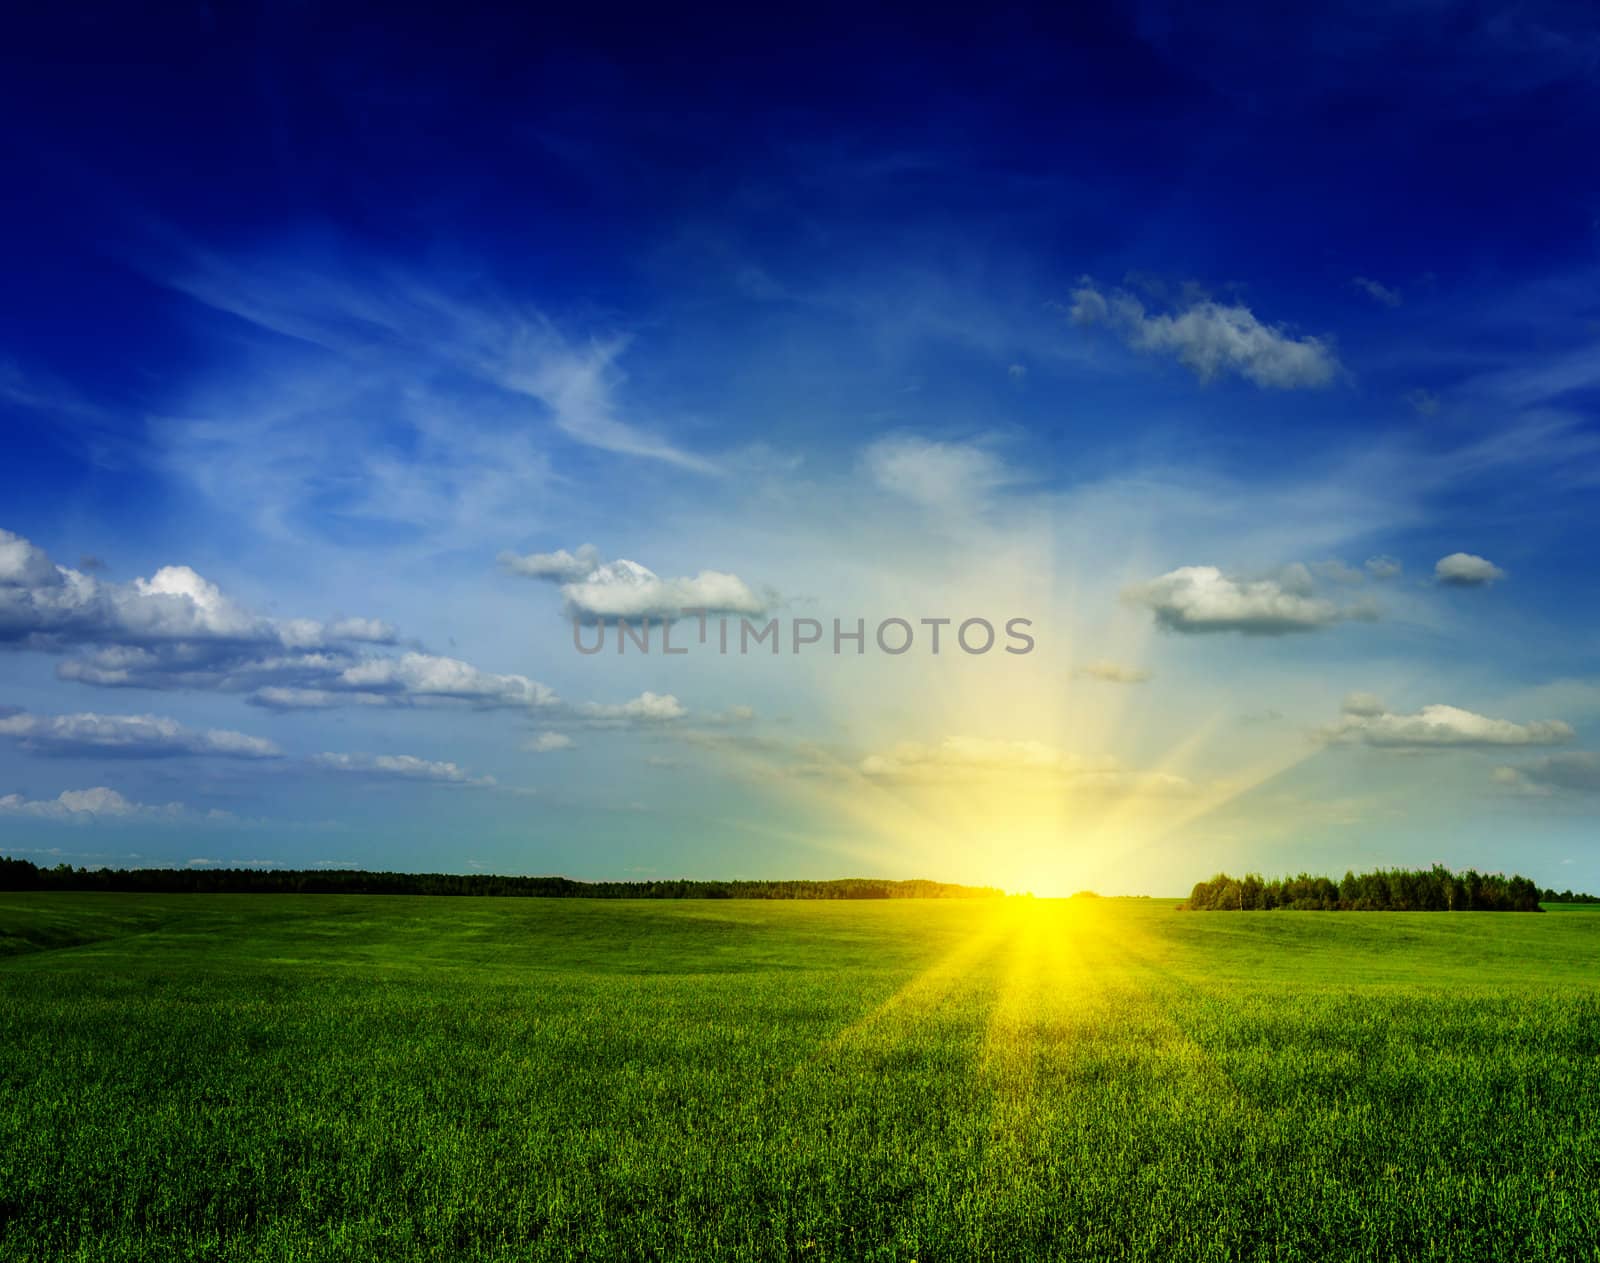 Spring summer background - green grass field meadow scenery lanscape with blue sky